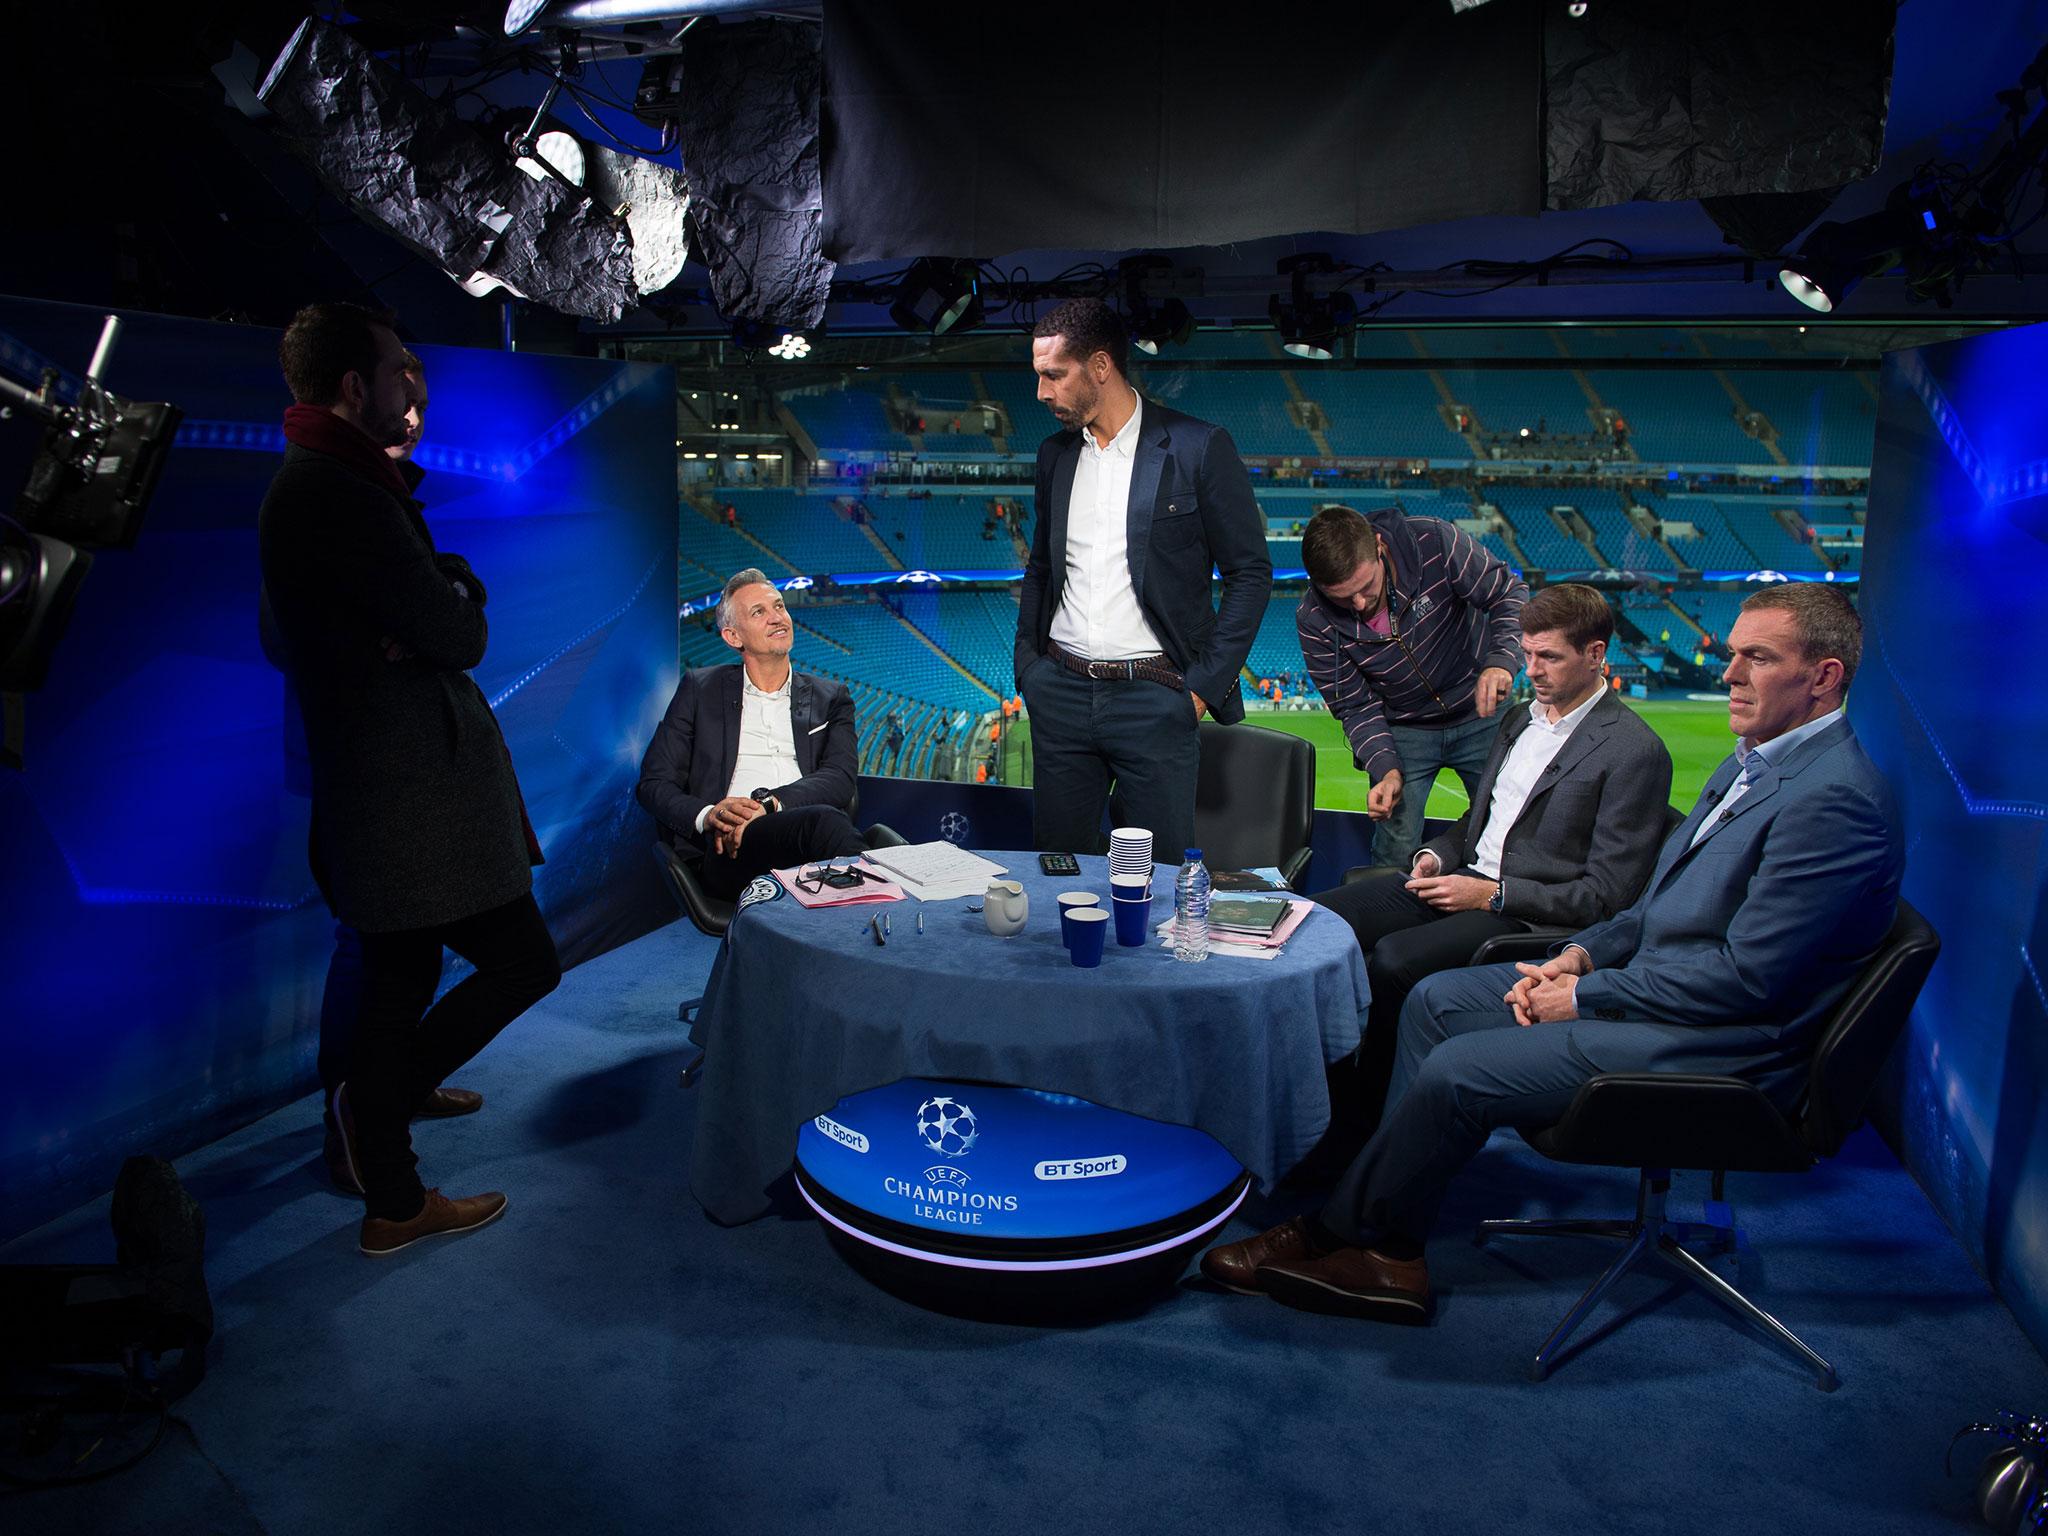 The studio resembles something of a dressing room filled with ex-professional footballers